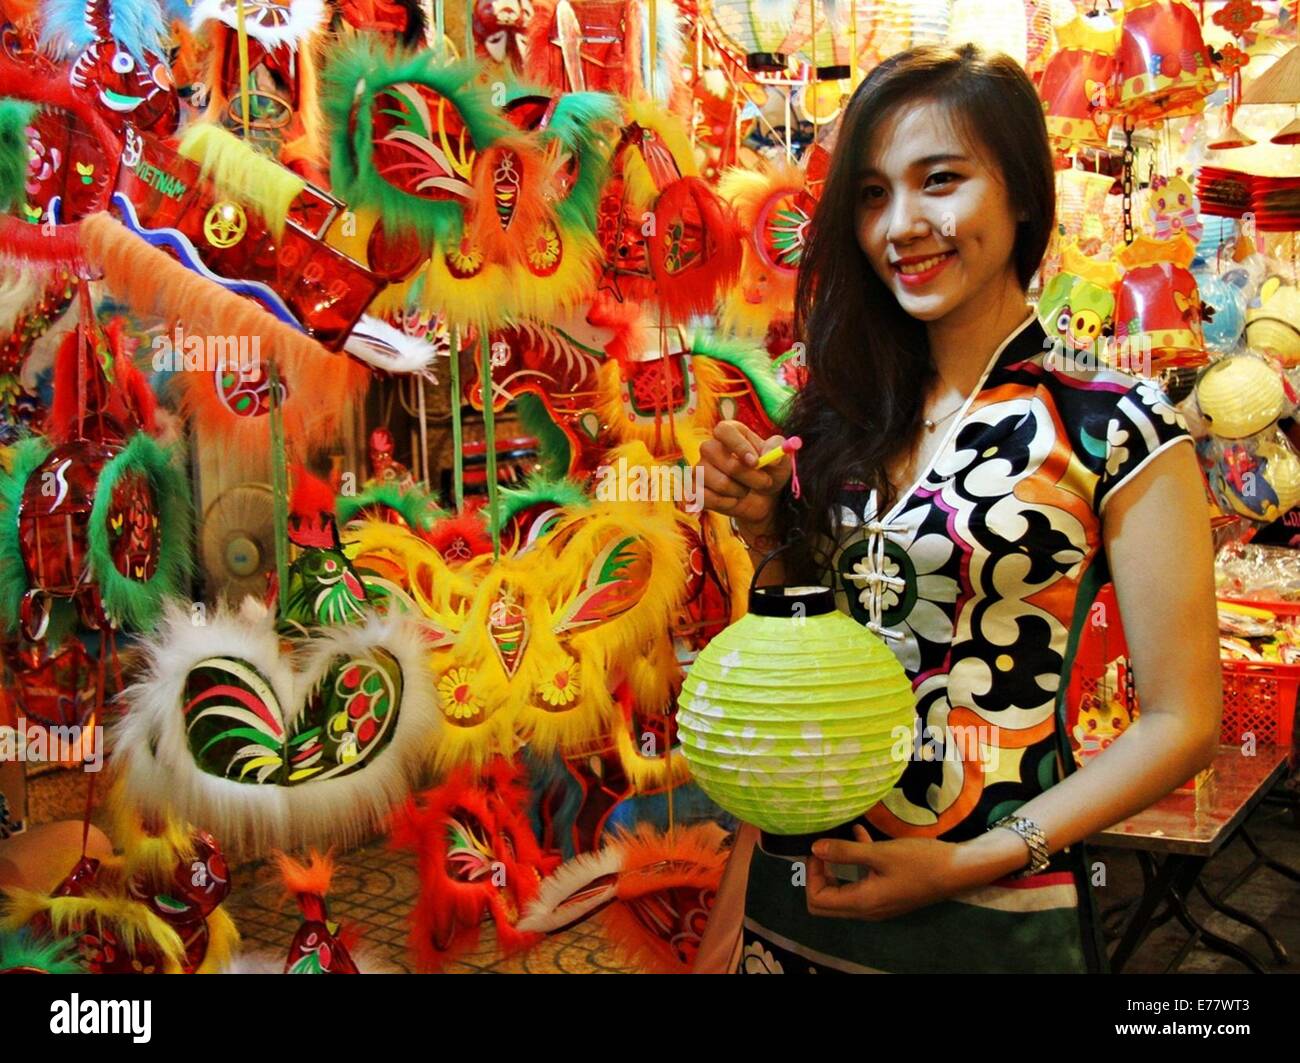 Ho Chi Minh City. 8th Sep, 2014. A girl poses for pictures during a visit to the Lantern Street in Ho Chi Minh City, on Sept. 8, 2014. The Mid-Autumn festival is one of the biggest celebrations of the year in Vietnam. © Tao Jun/Xinhua/Alamy Live News Stock Photo